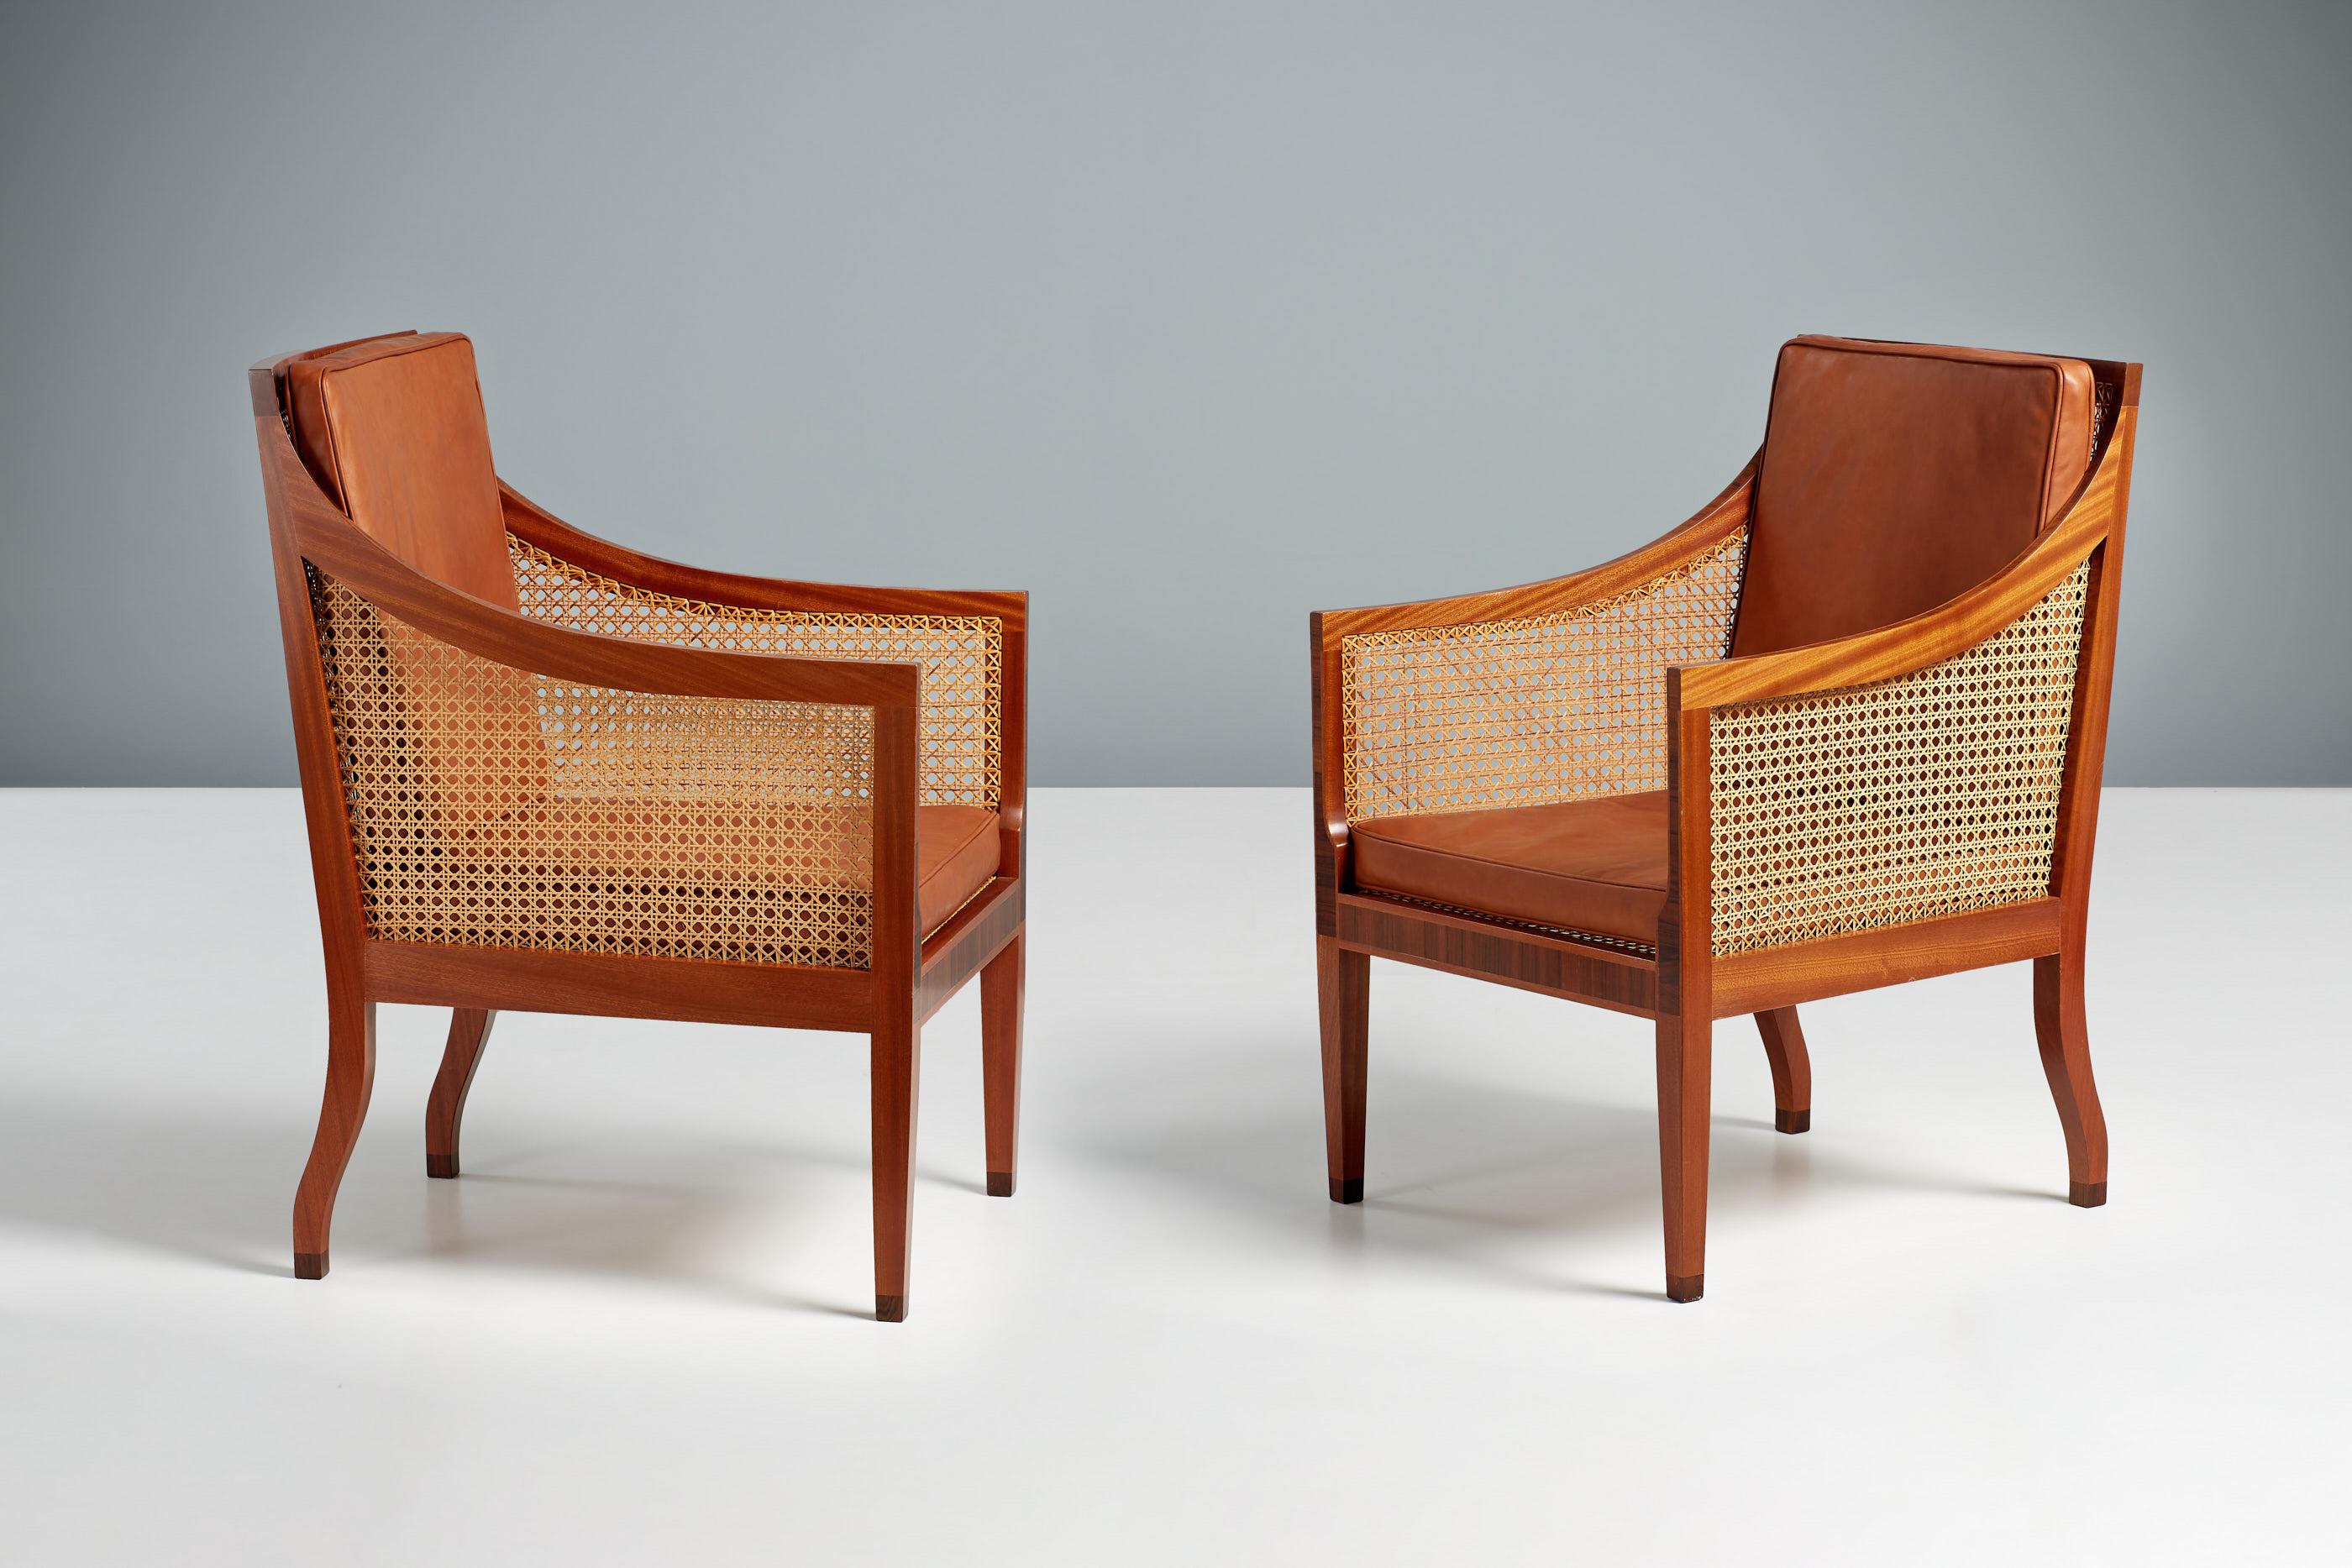 Kaare Klint, Model 4488 Bergere chairs, 1931.

A stunning pair of the iconic Bergere chairs by the father of the Danish Modern movement: Kaare Klint. The chairs were produced by master cabinetmakers Rud. Rasmussen.

This model was Klint’s take